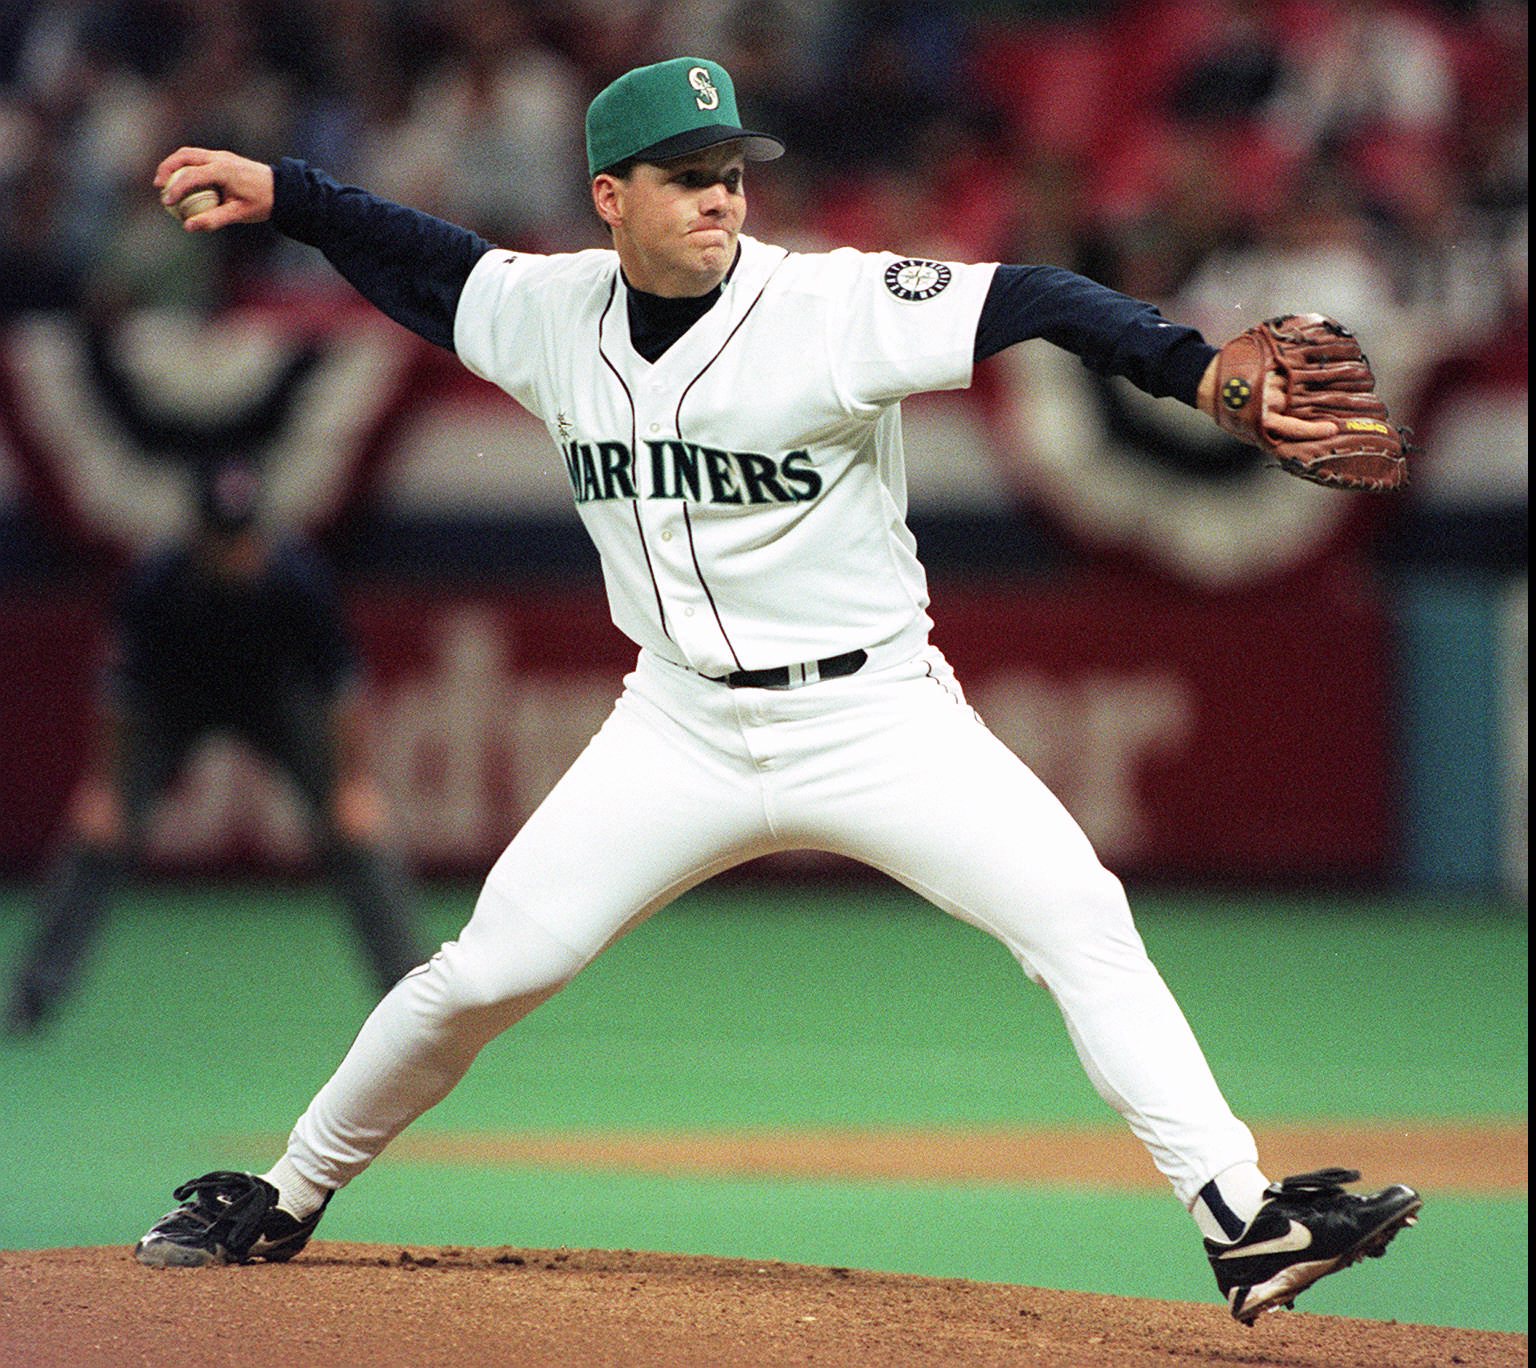 Throwback Thursday: 1984 Seattle Mariners